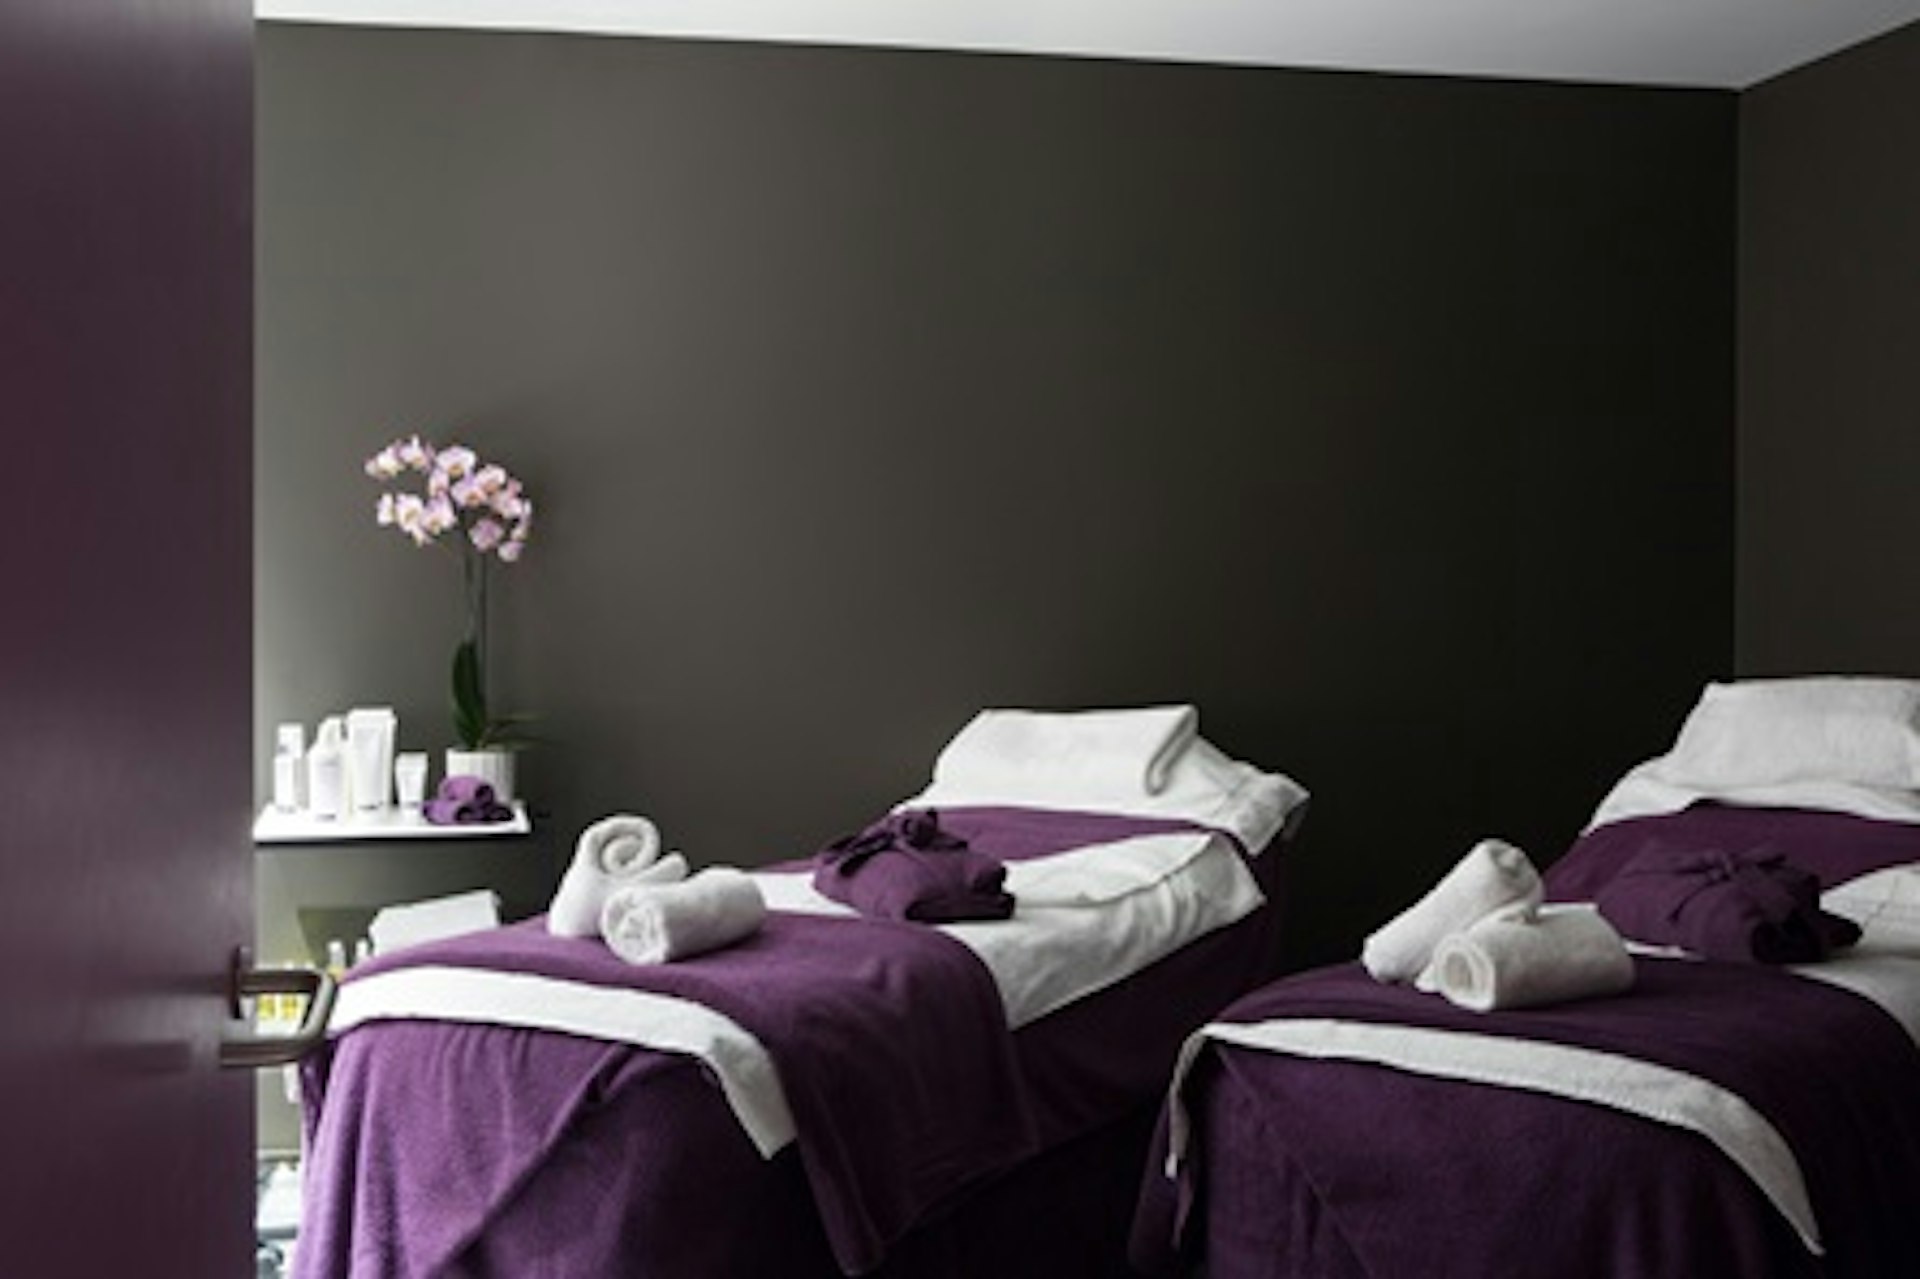 PURE Spa & Beauty Pamper Package including a 60 minute Massage or Facial for Two 3